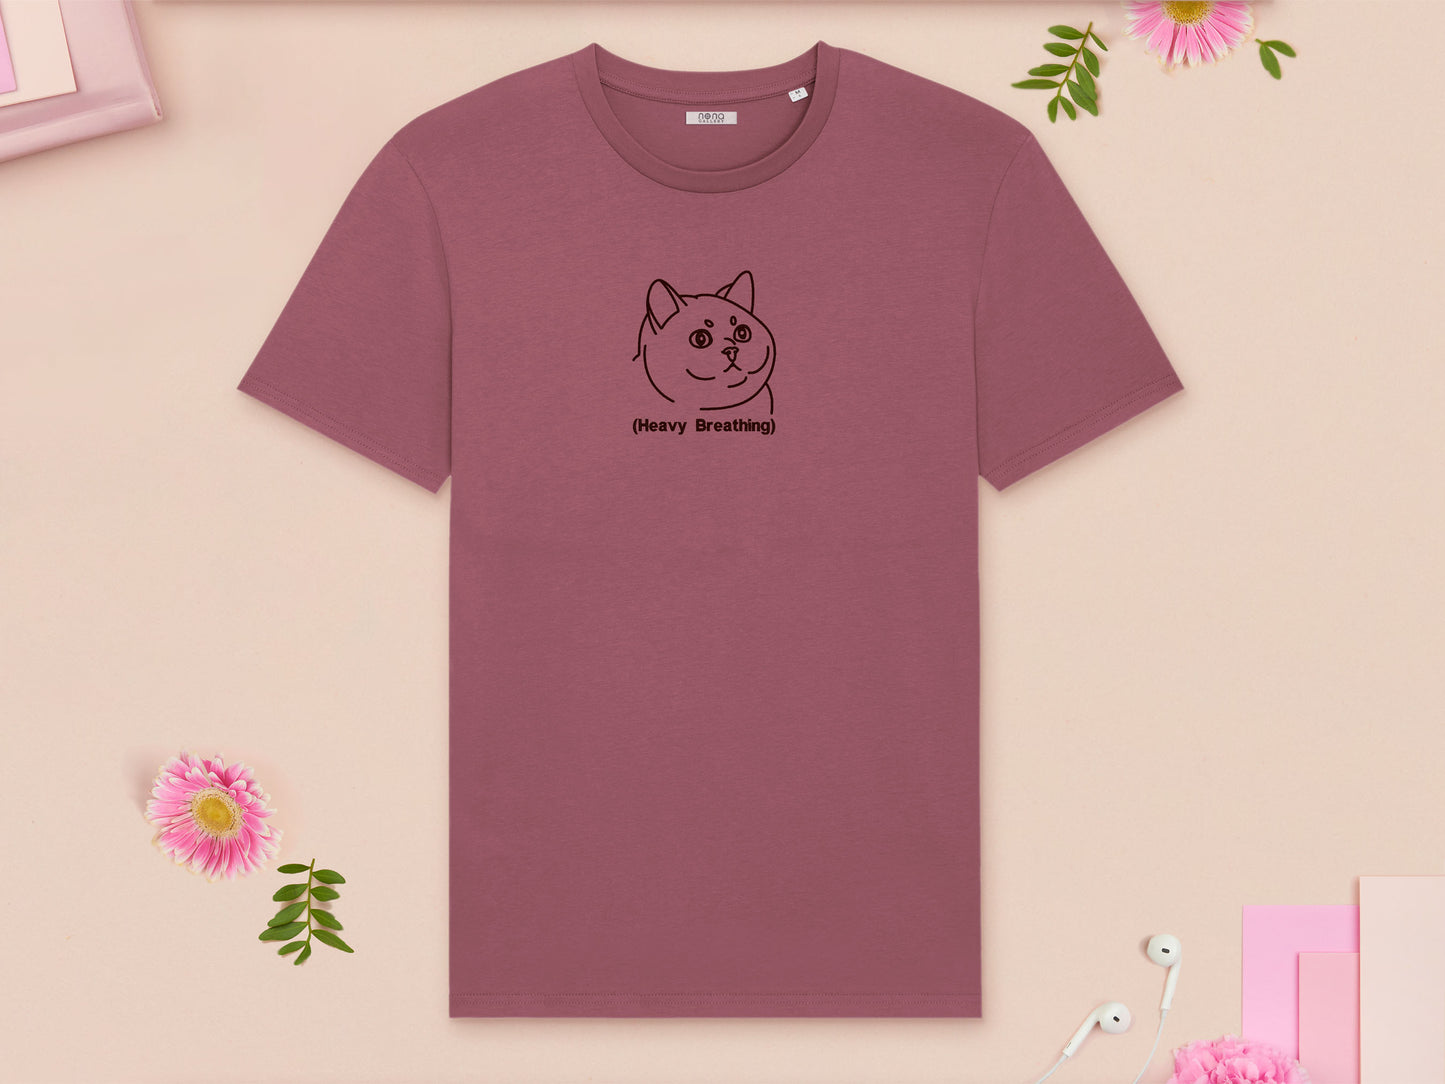 A red crew neck short sleeve t-shirt, with an embroidered black thread design of cute fat cat portrait with text underneath saying (Heavy Breathing)